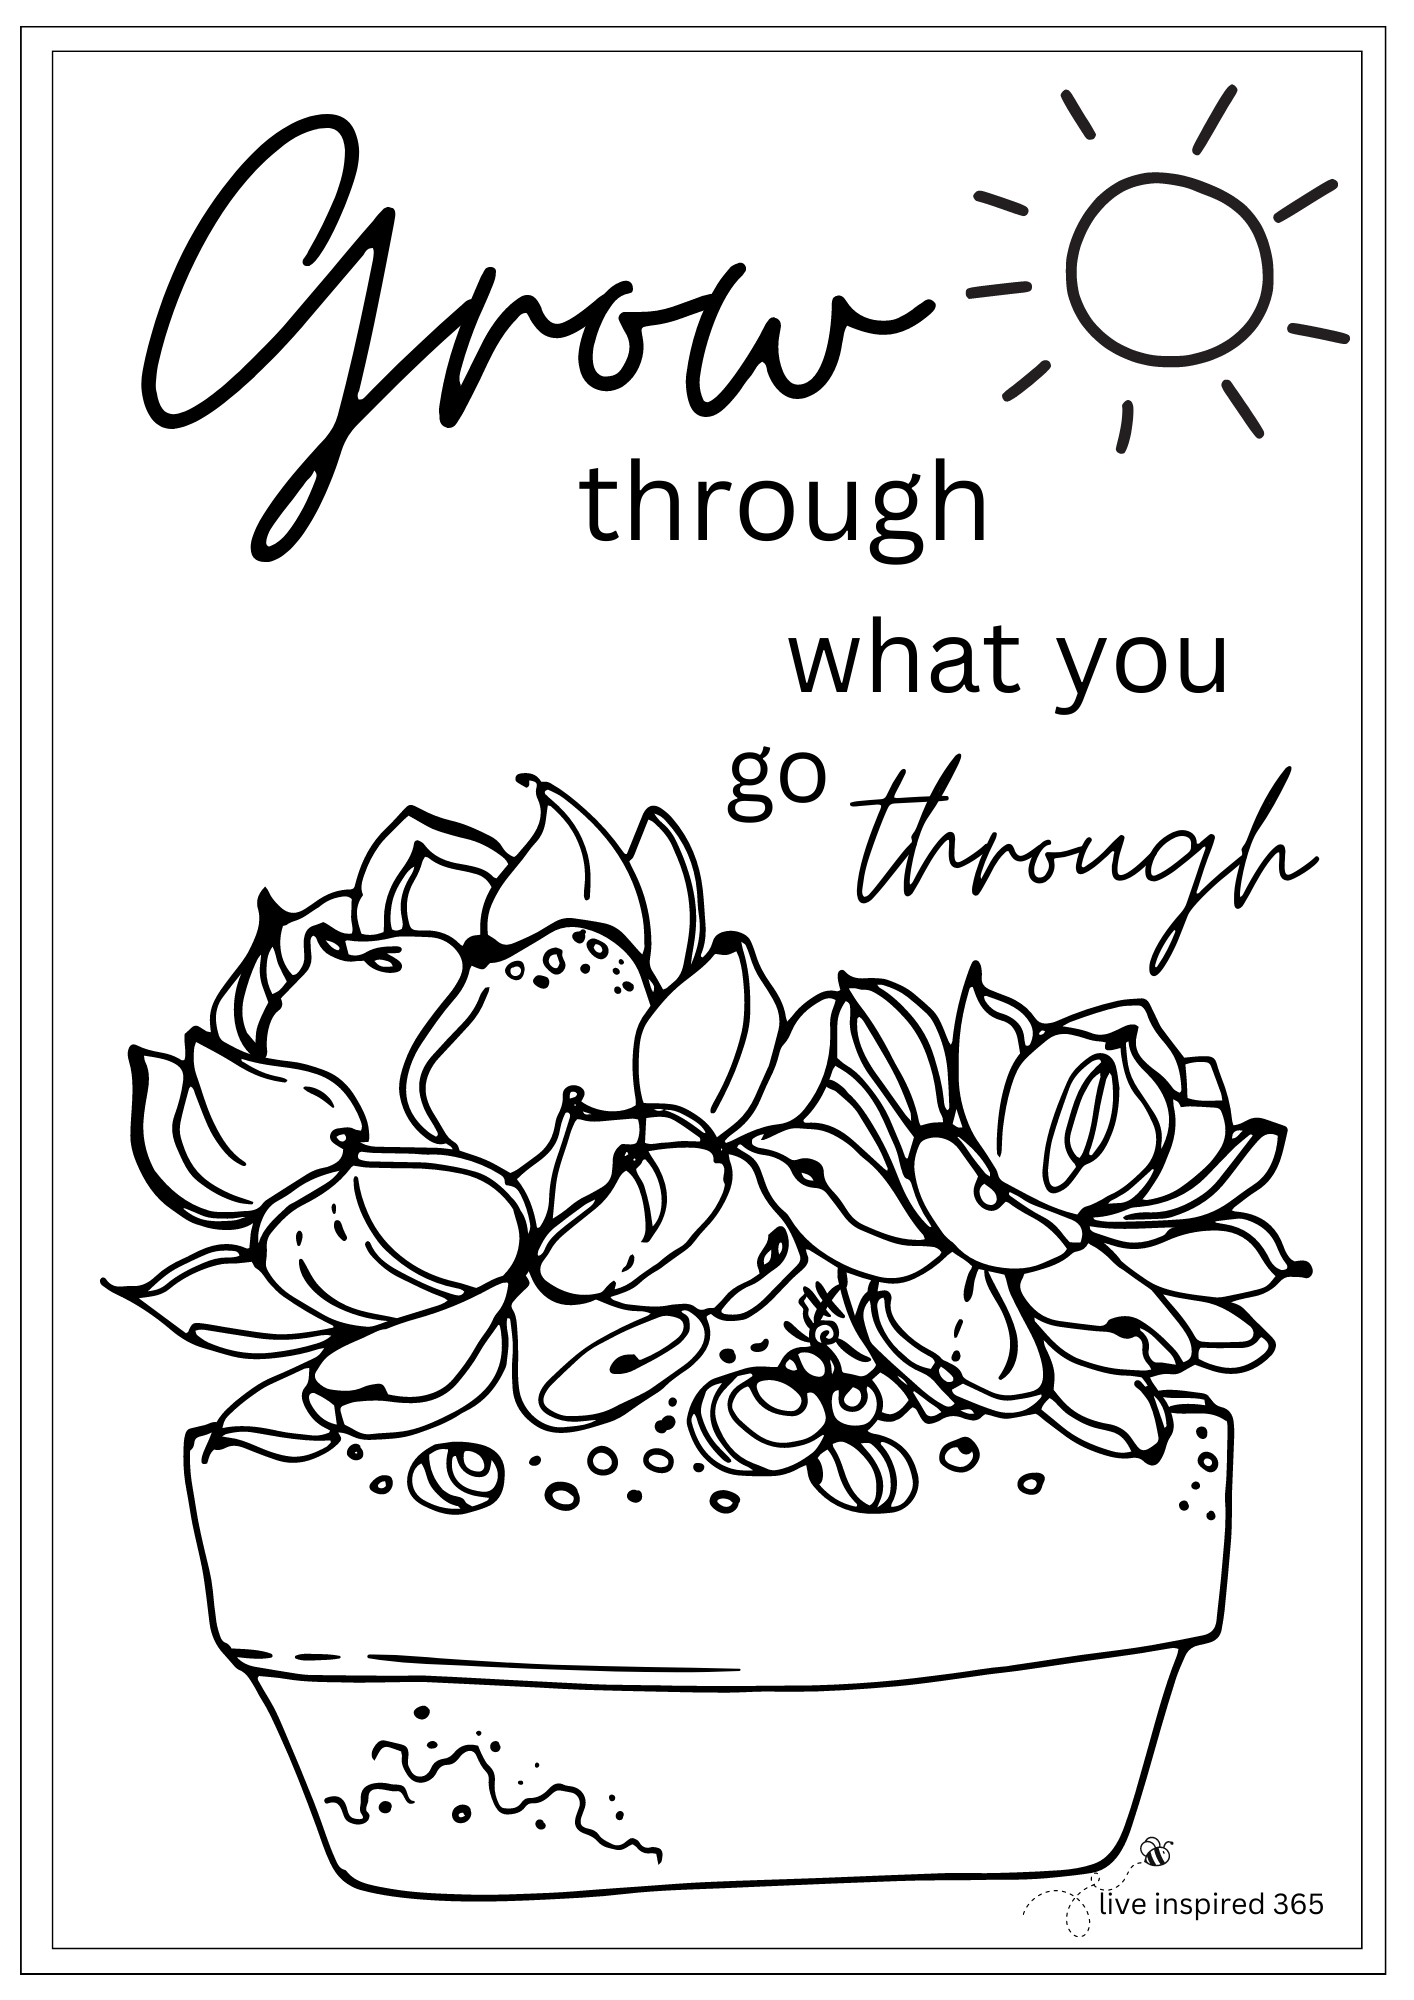 Grow Through-Coloring Page